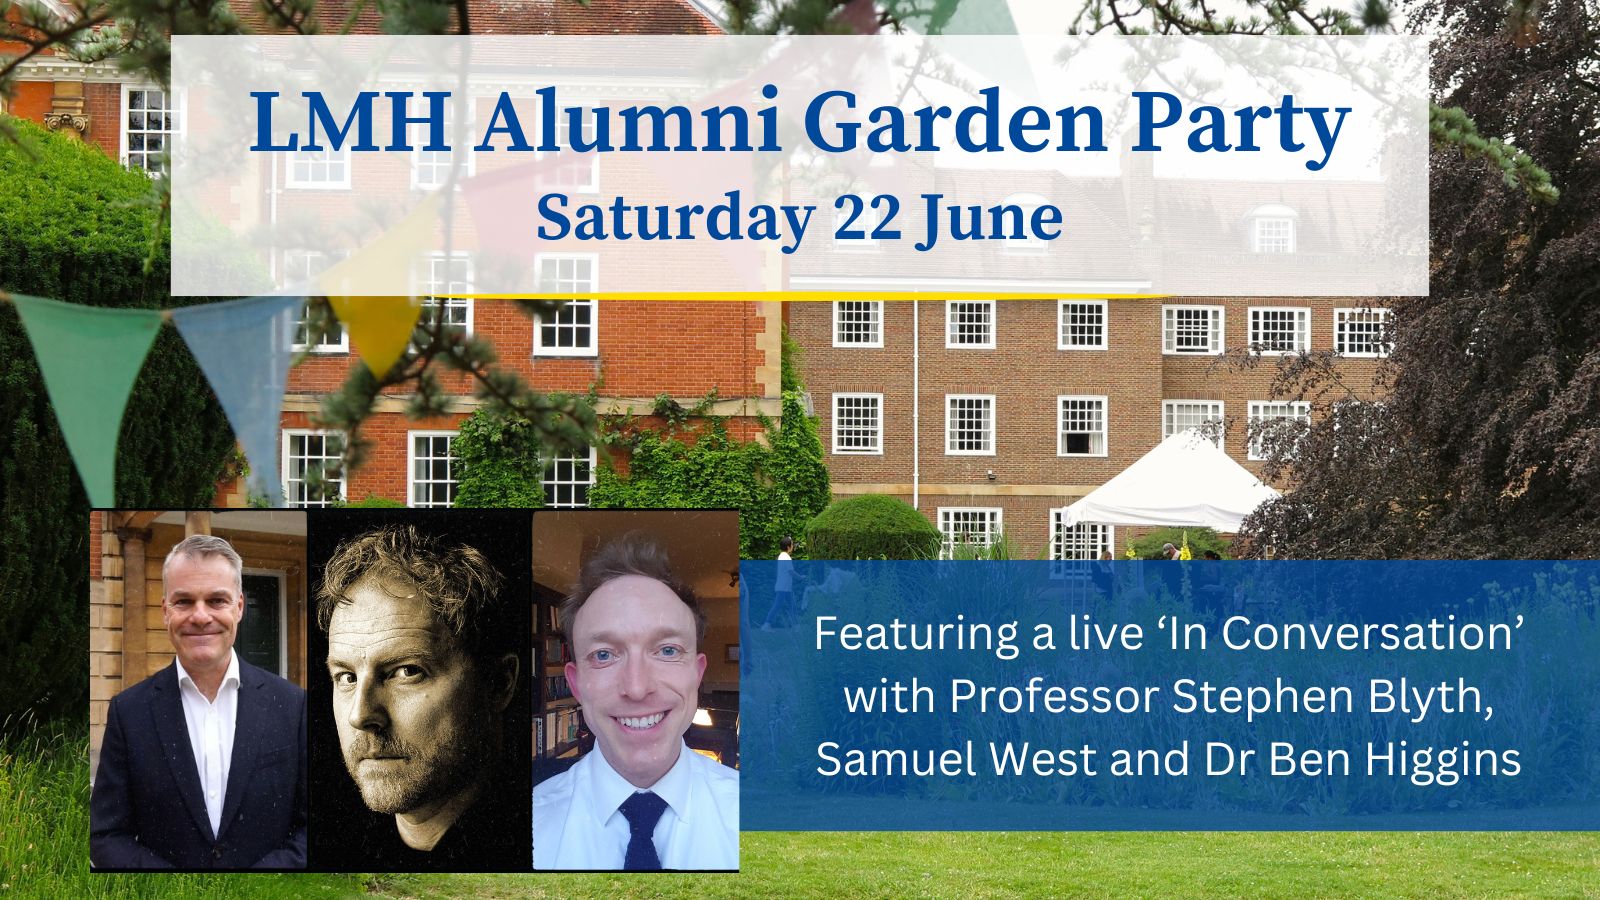 Photos of Prof Stephen Blyth, Samuel West and Ben Higgins on a background photo of the LMH college gardens